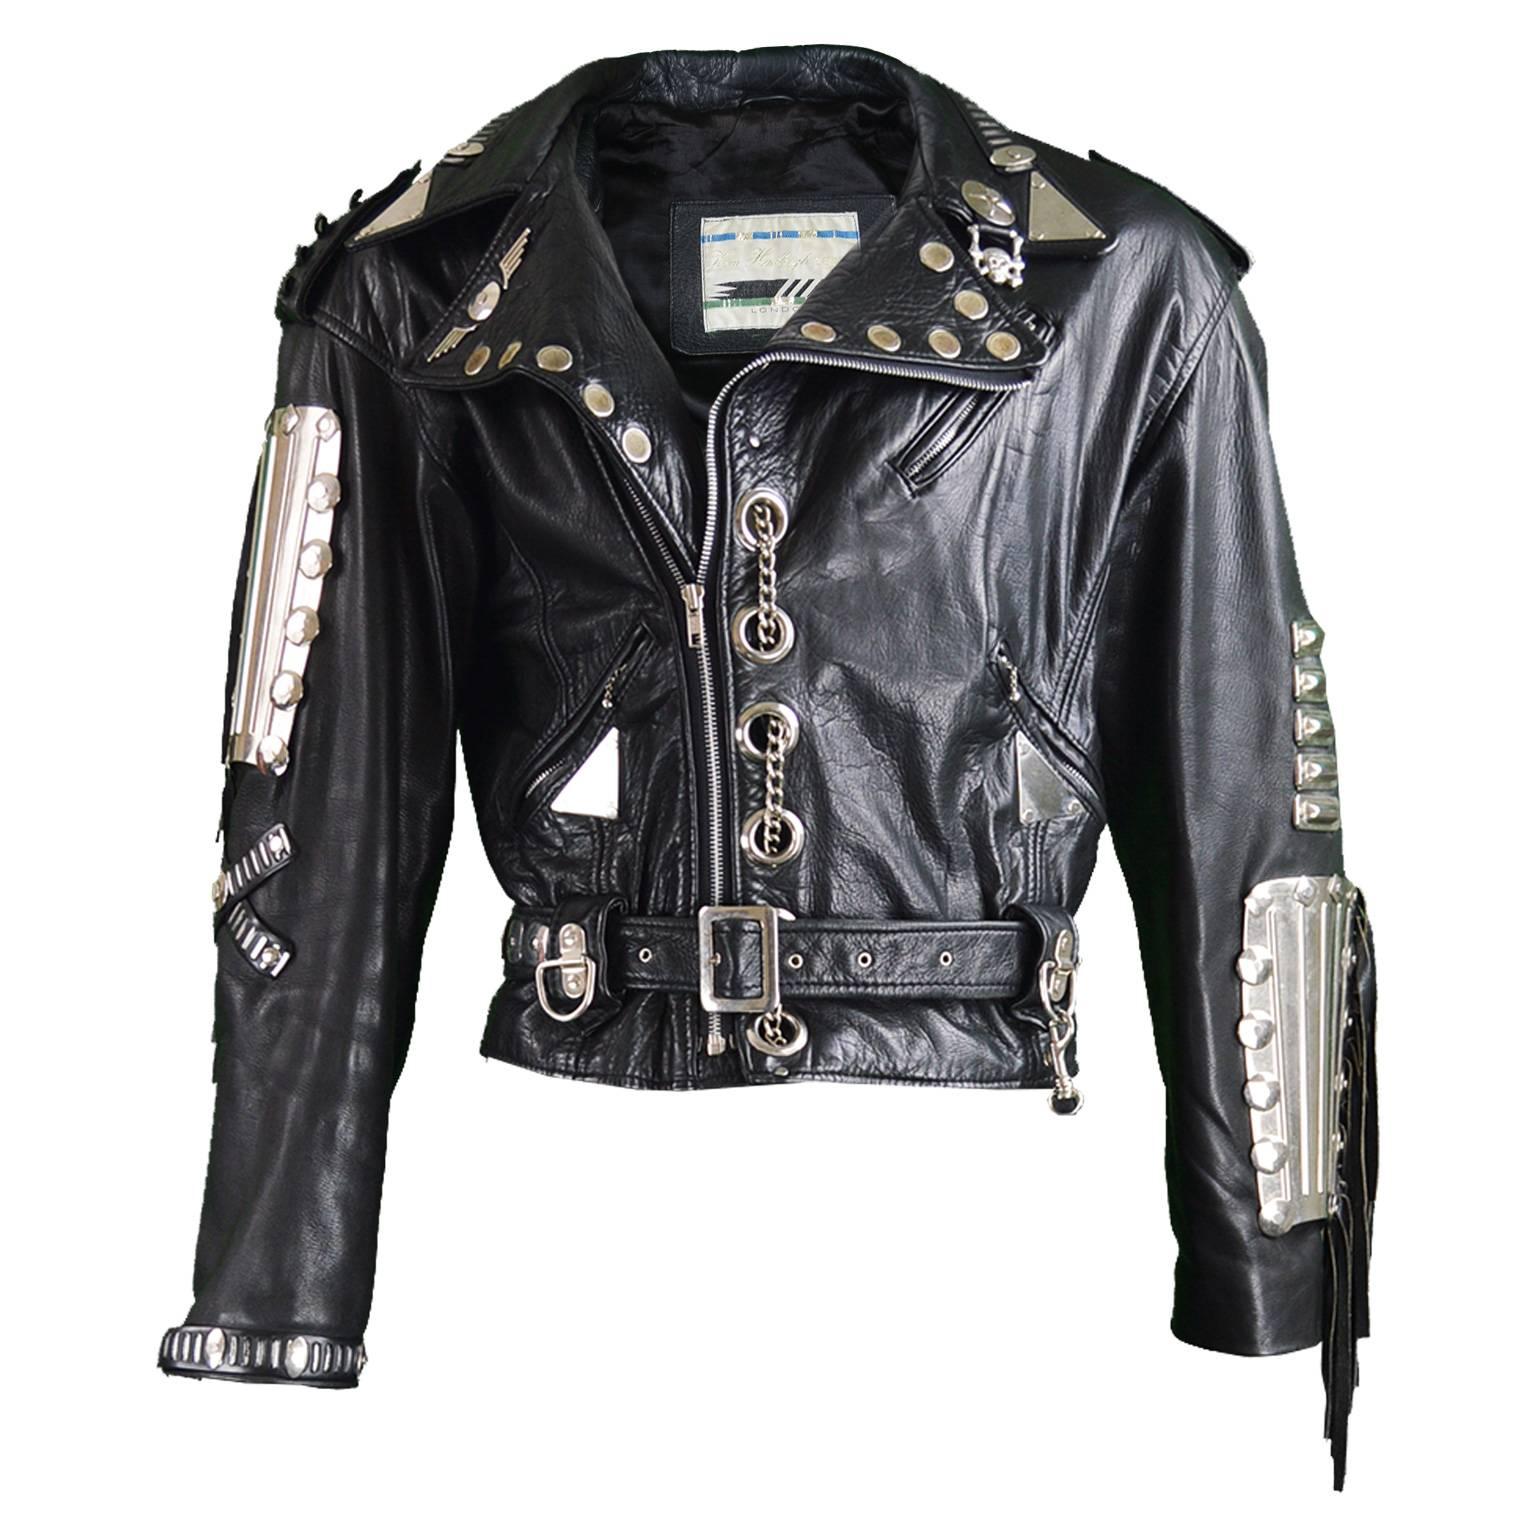 Kim Hadleigh Designs Vintage Men's Armor Plated Leather Jacket, 1980s